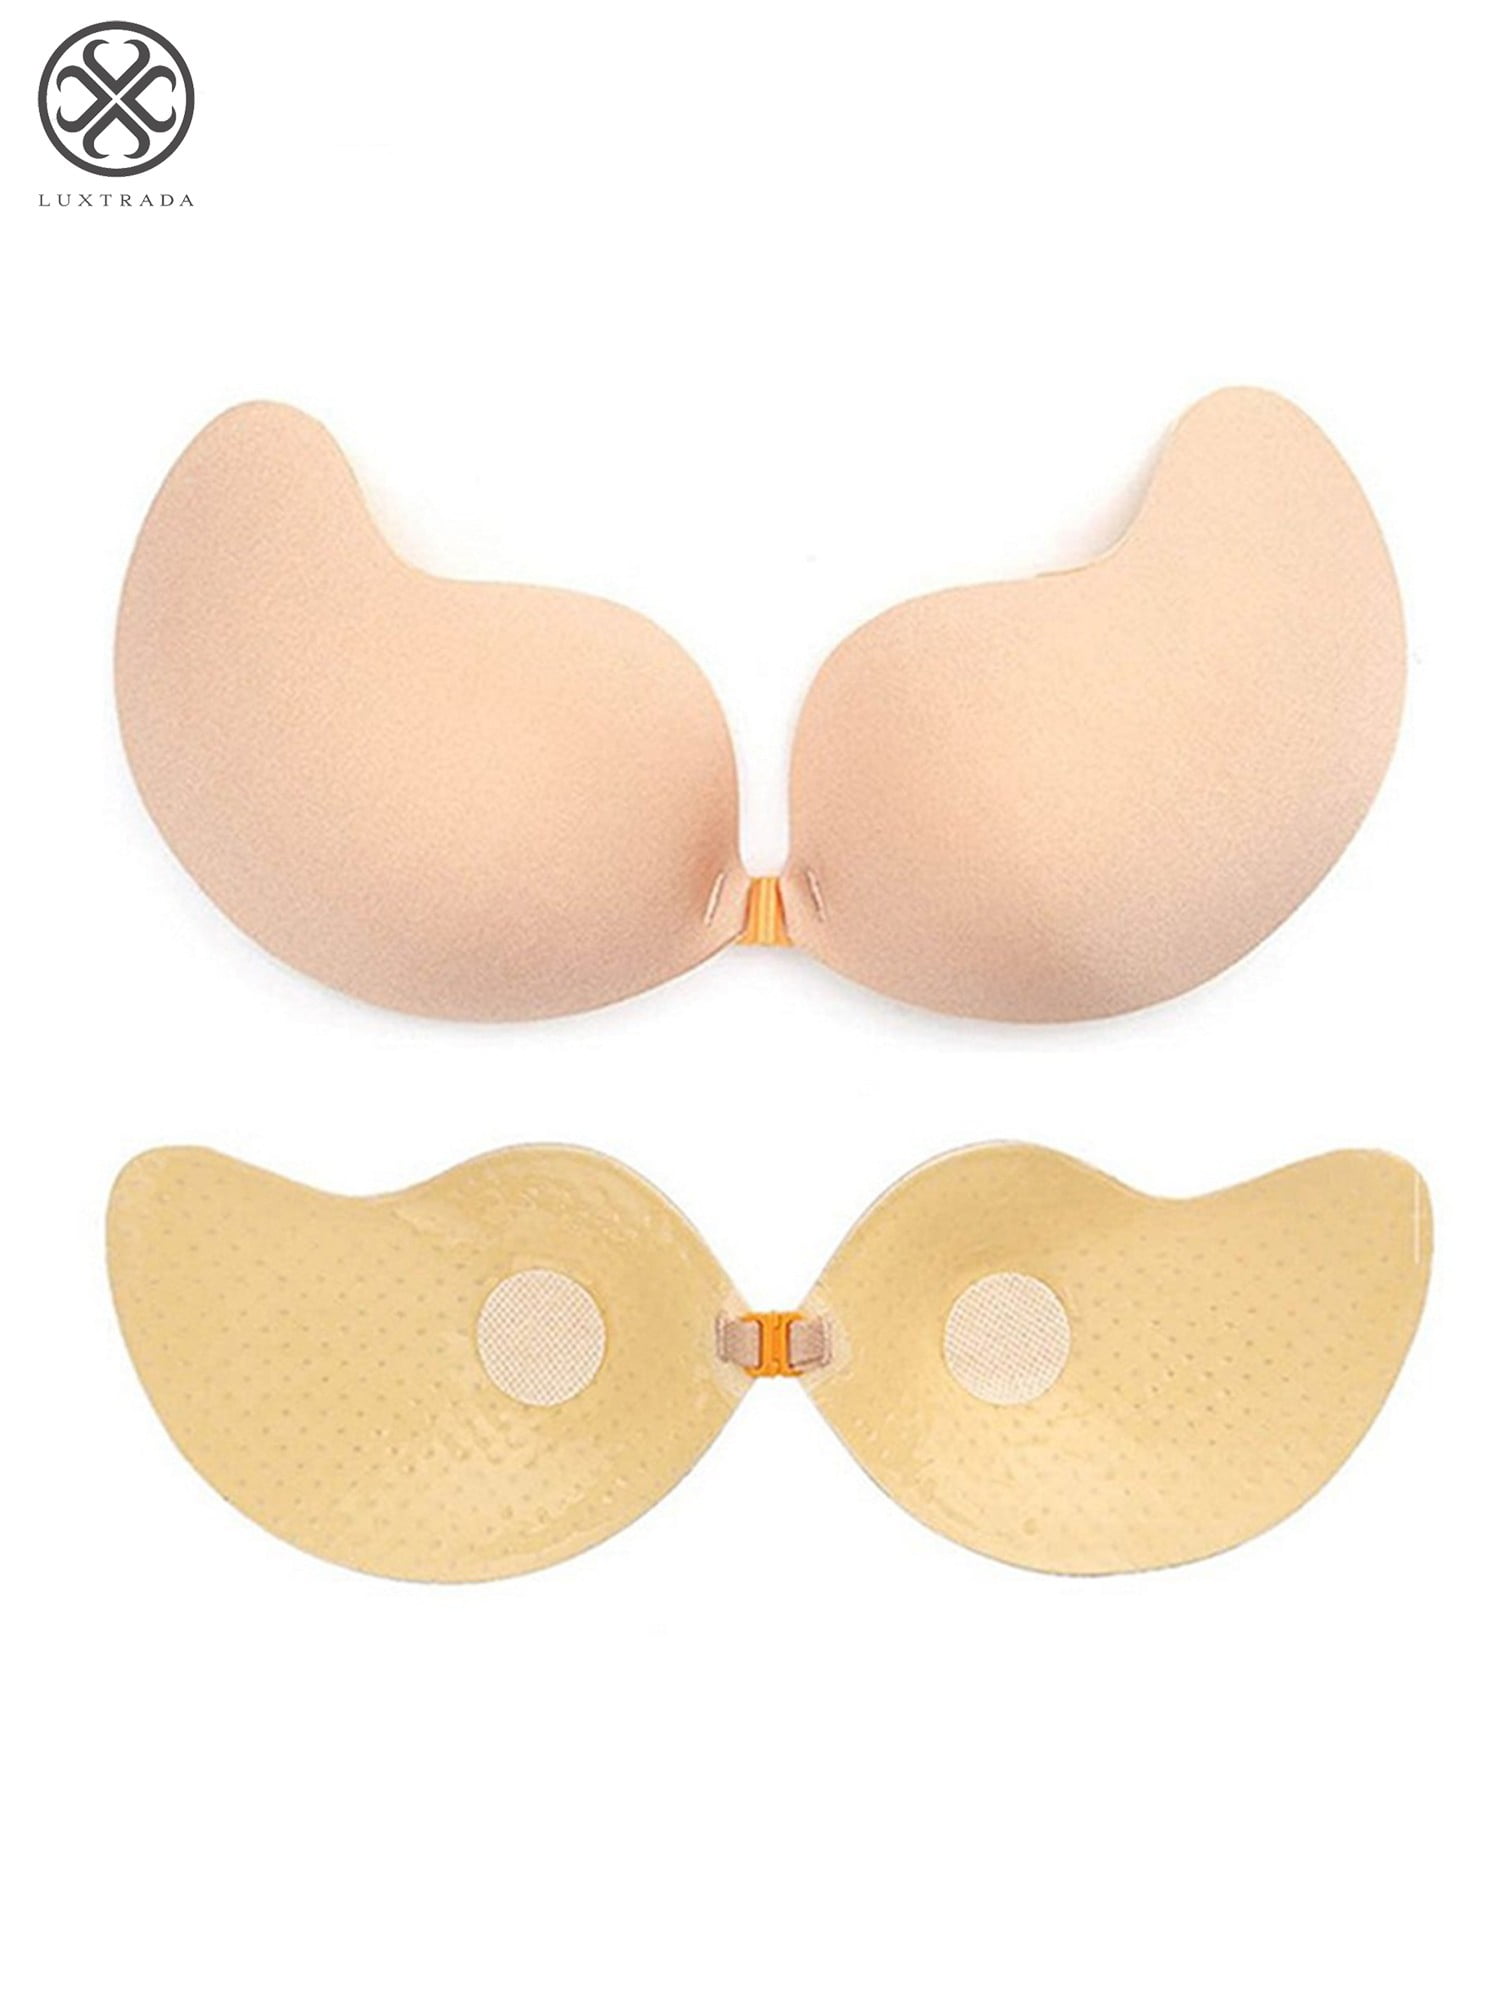 Luxtrada Strapless Sticky Bra Self Adhesive Backless Push Up Bra Reusable  Invisible Silicone Bras for Women 2pcs-Black+Skin,B Cup 